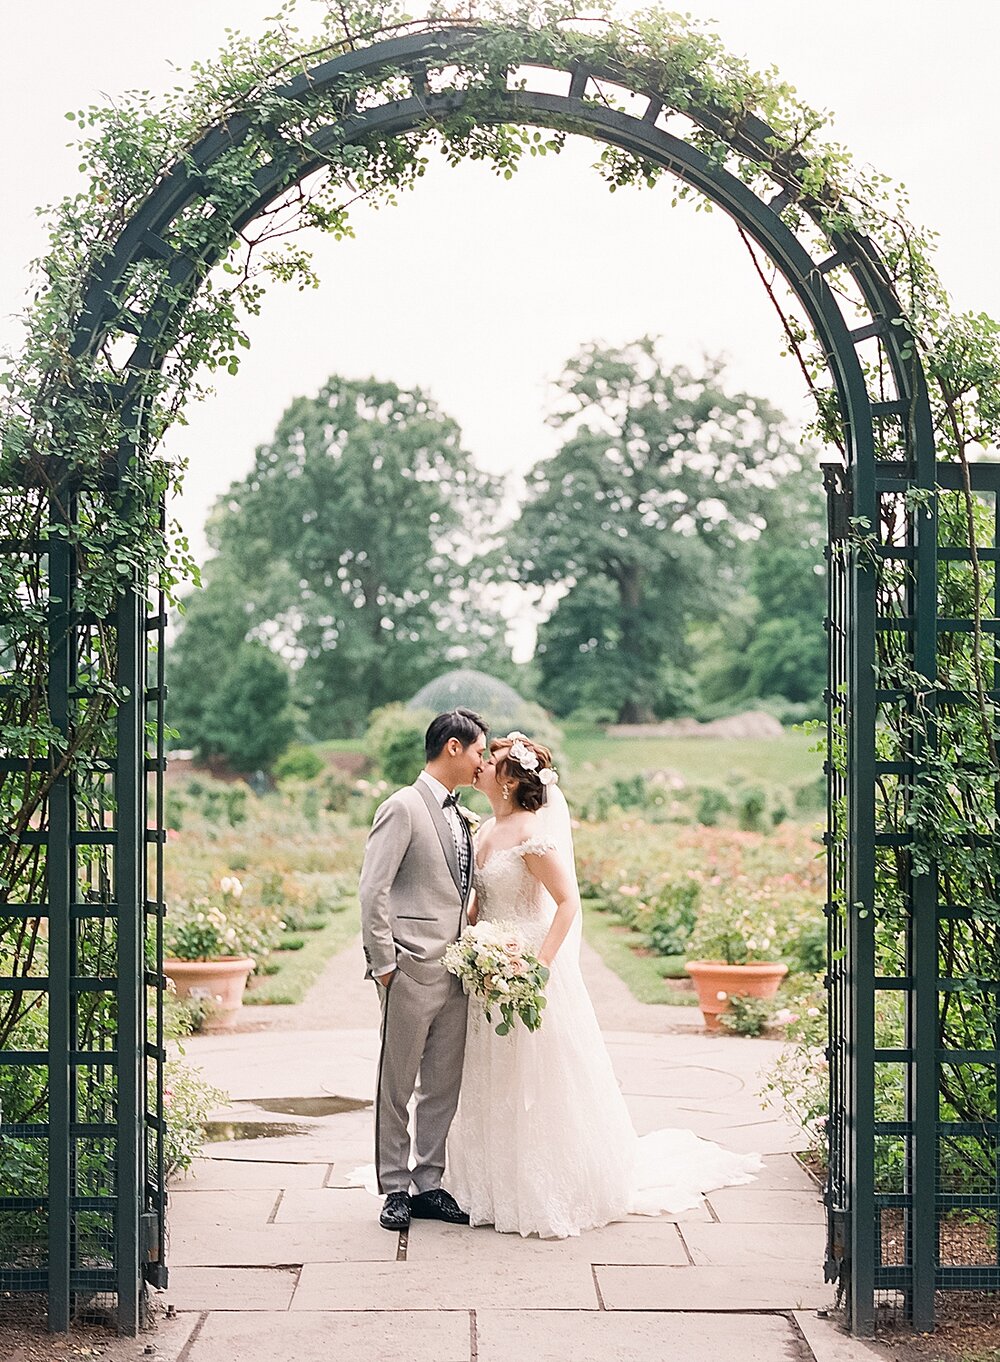 bride and groom pose under arbor in New York | Tri-State area wedding venues photographed by Asher Gardner Photography